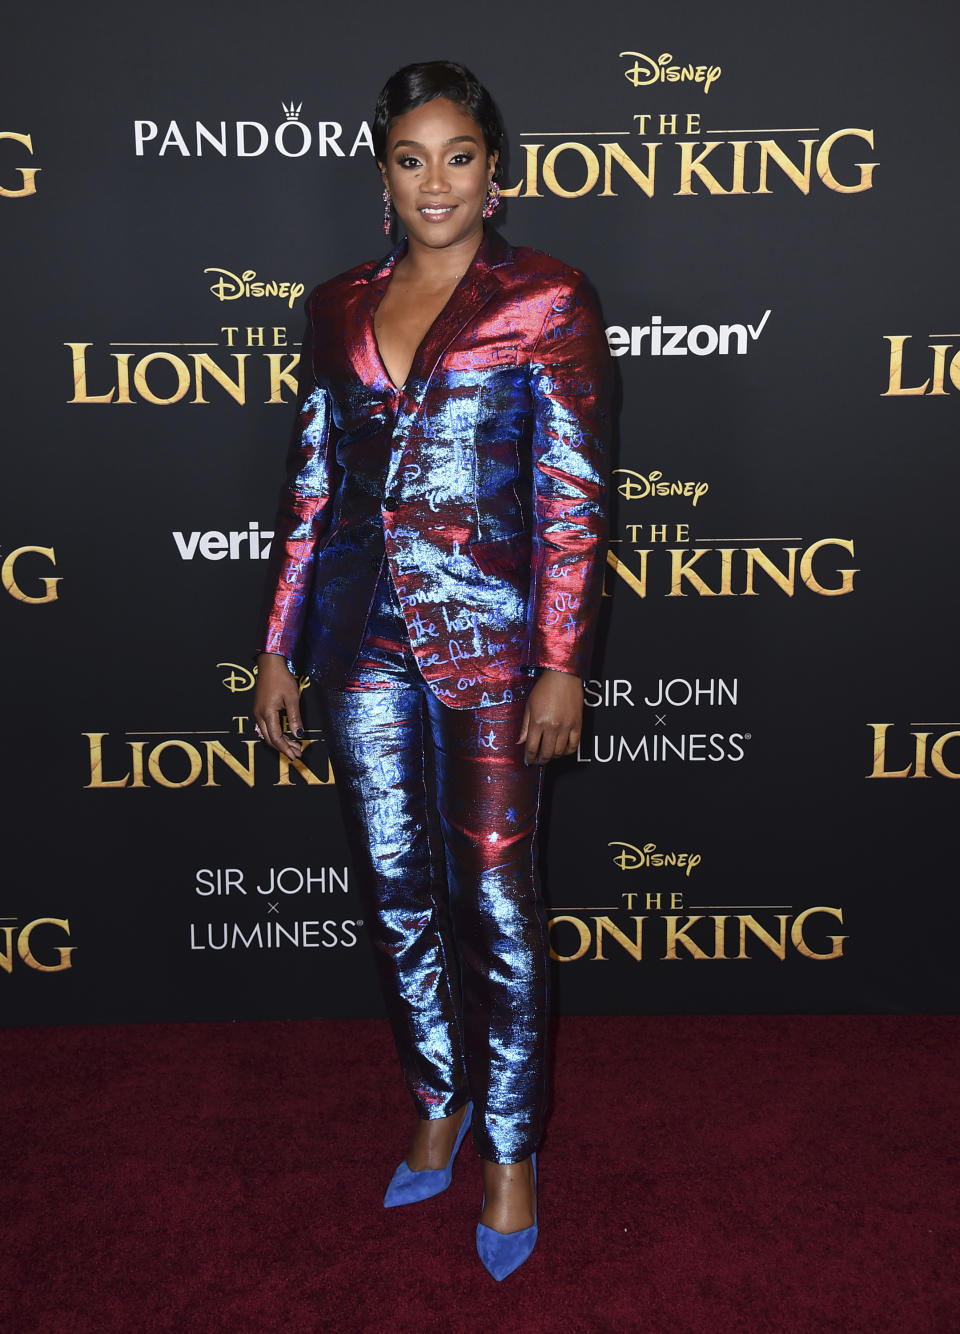 Tiffany Haddish arrives at the world premiere of "The Lion King" on Tuesday, July 9, 2019, at the Dolby Theatre in Los Angeles. (Photo by Jordan Strauss/Invision/AP)